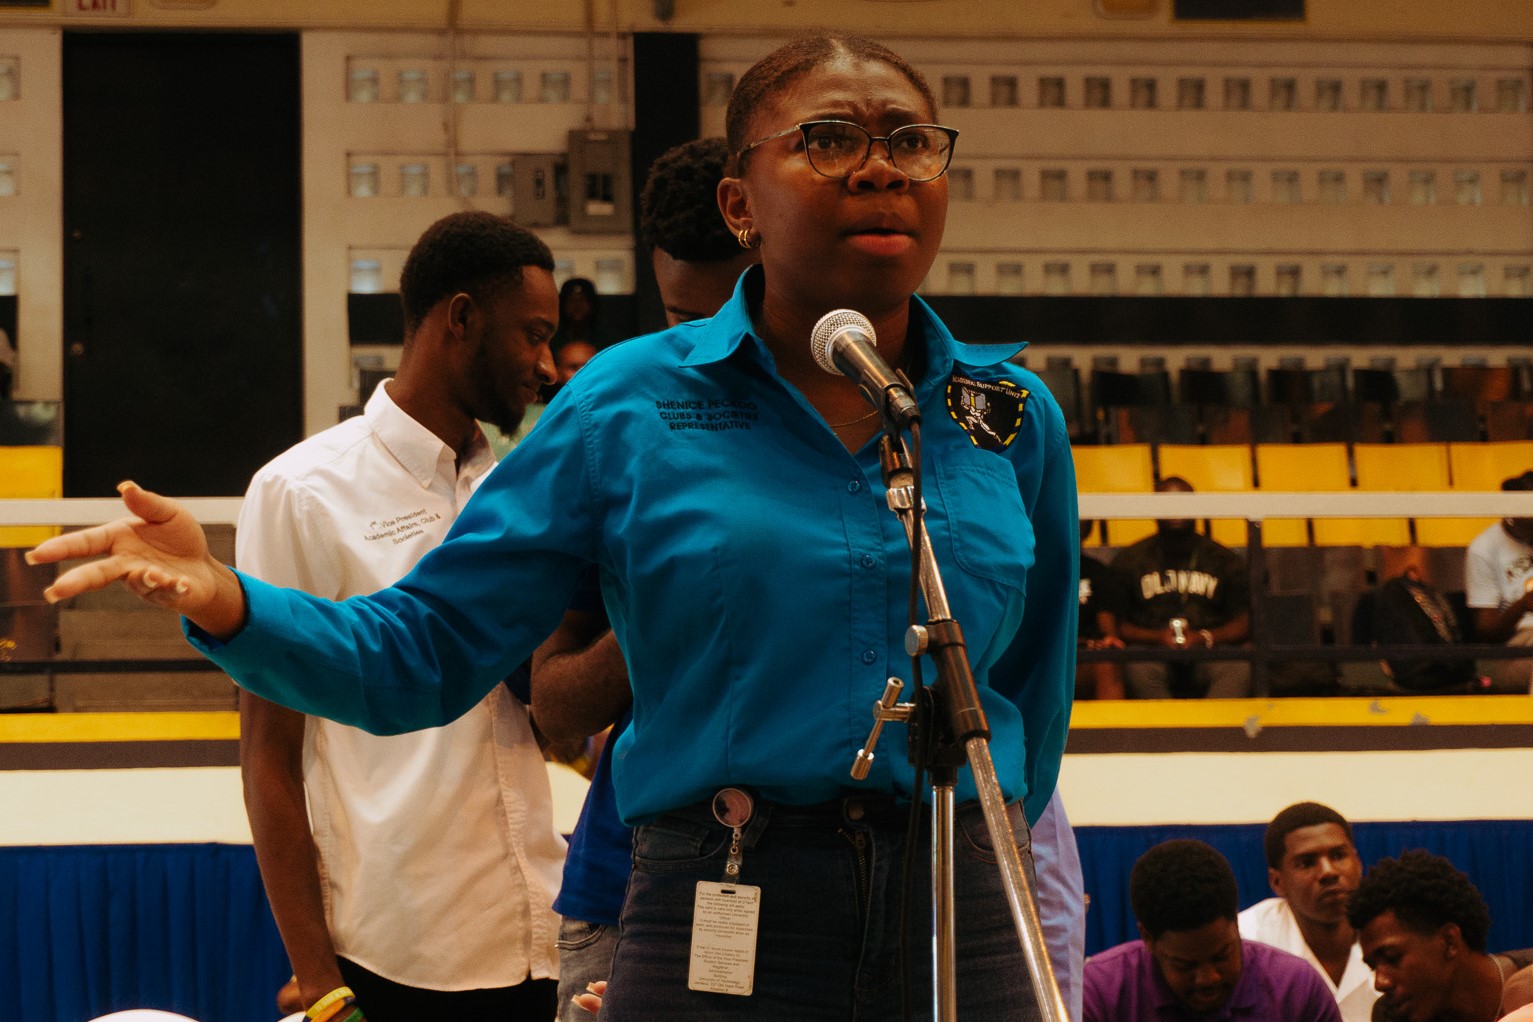 Shanice Peckoo, a member of the UTech Students' Union's Academic Support Unit (ASU) council speaks at the town hall meeting with the new UTech Jamaica President, Dr. Kevin Brown. Photo by Jhada Cohen.